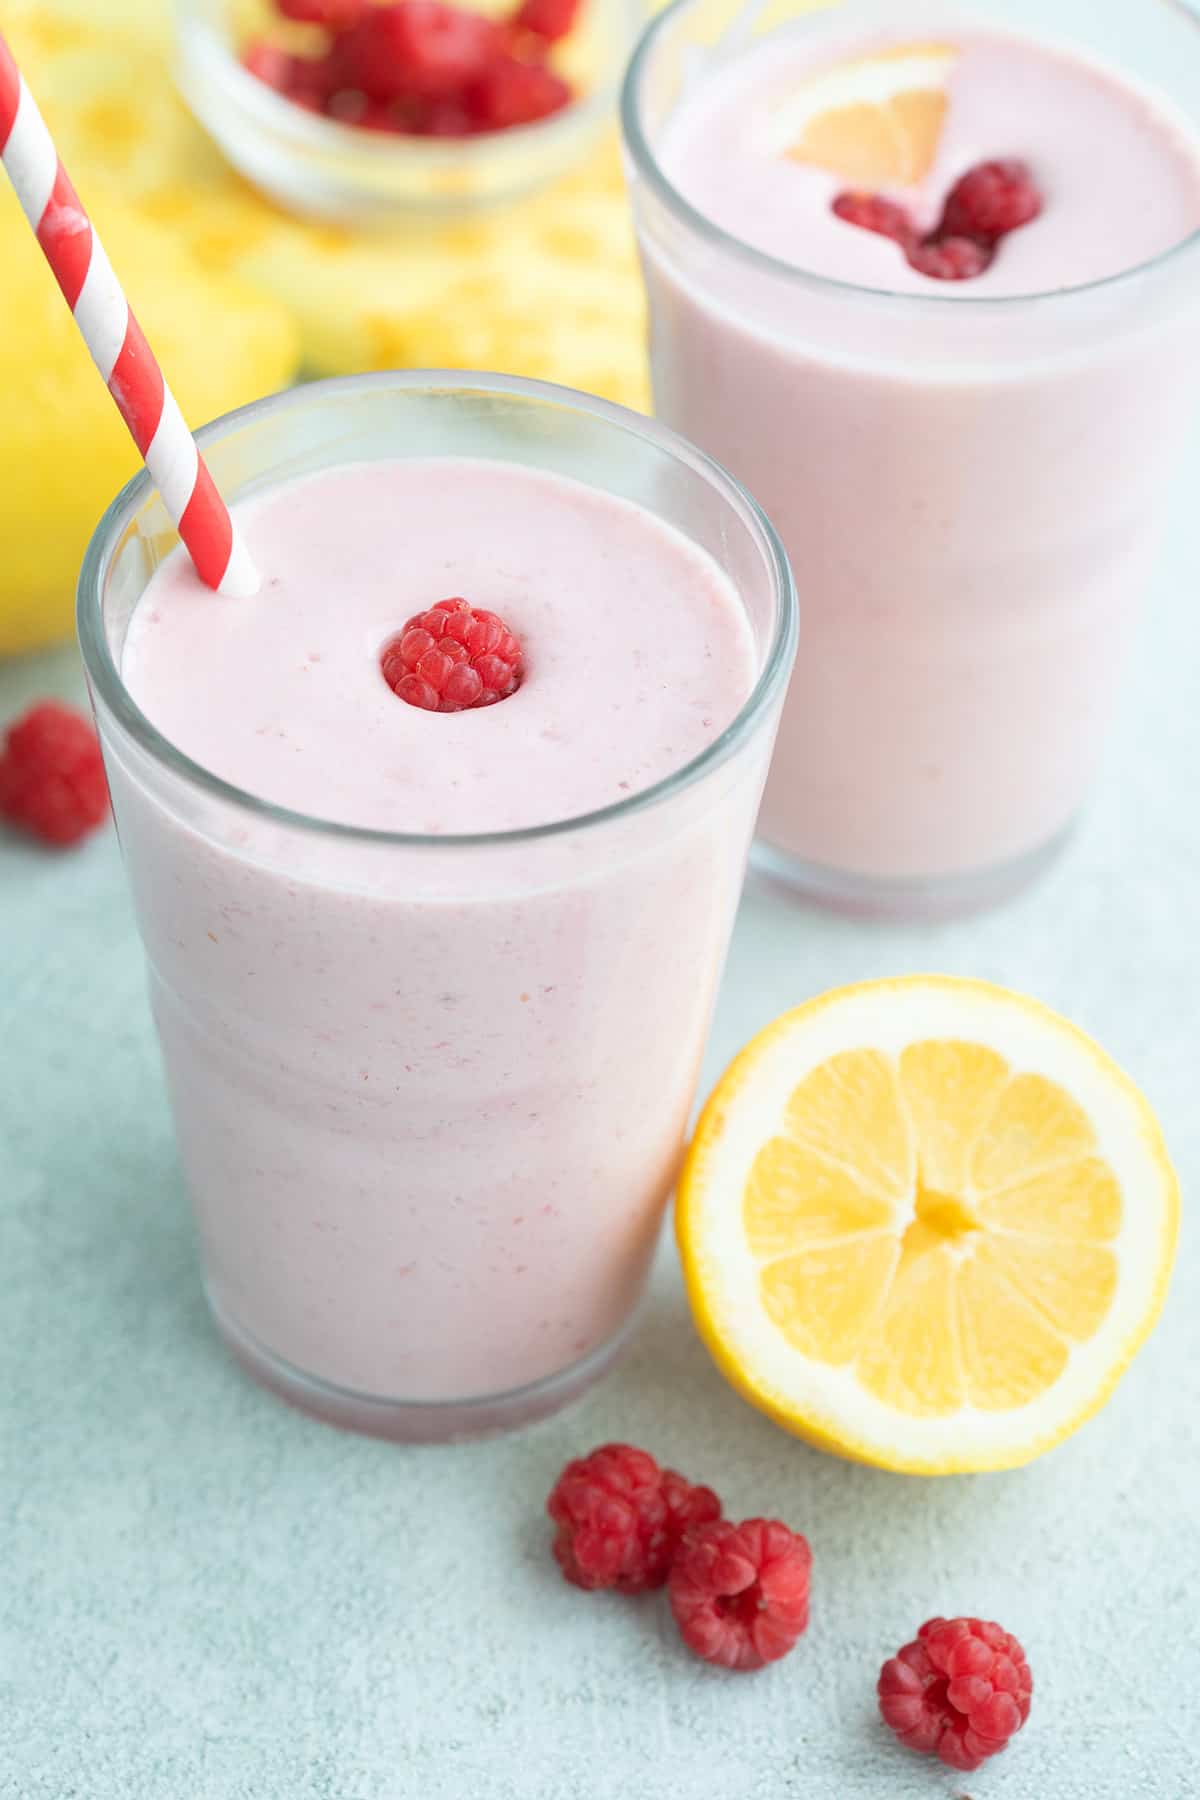 Two raspberry keto protein shakes on a table with lemon and raspberries.